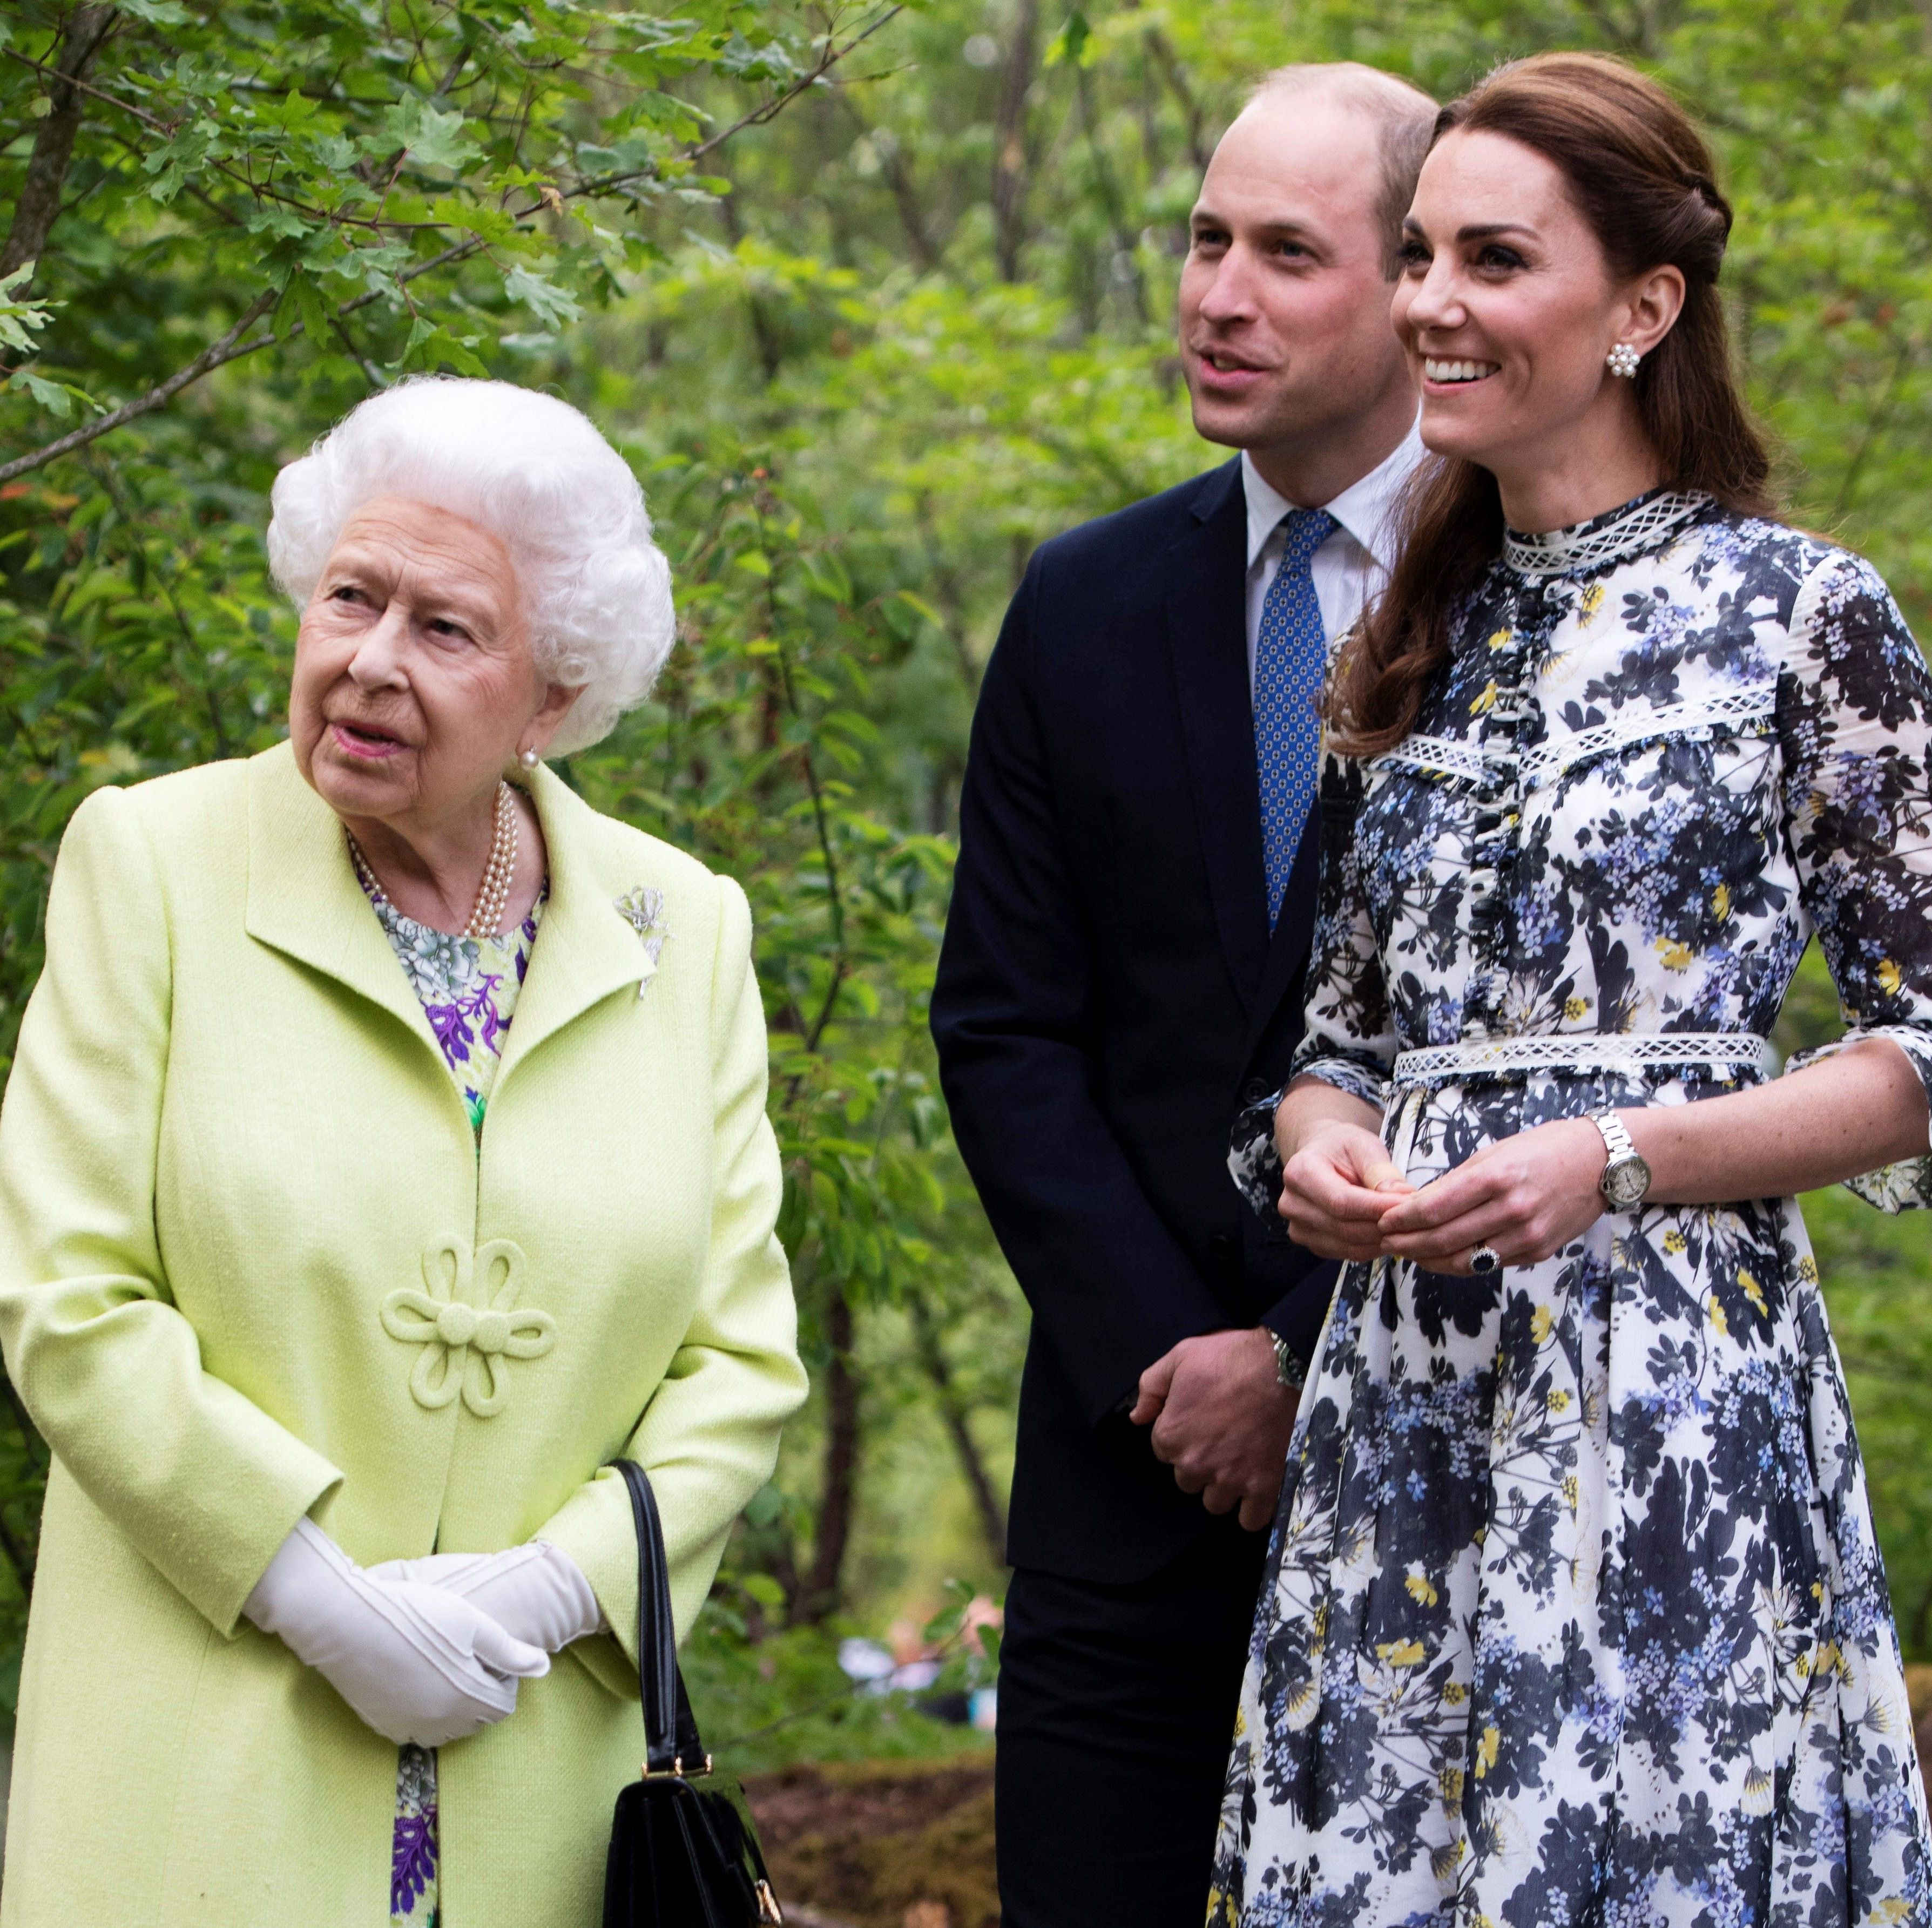 Kate Middleton and Prince William Make First Comments on the Queen's Death